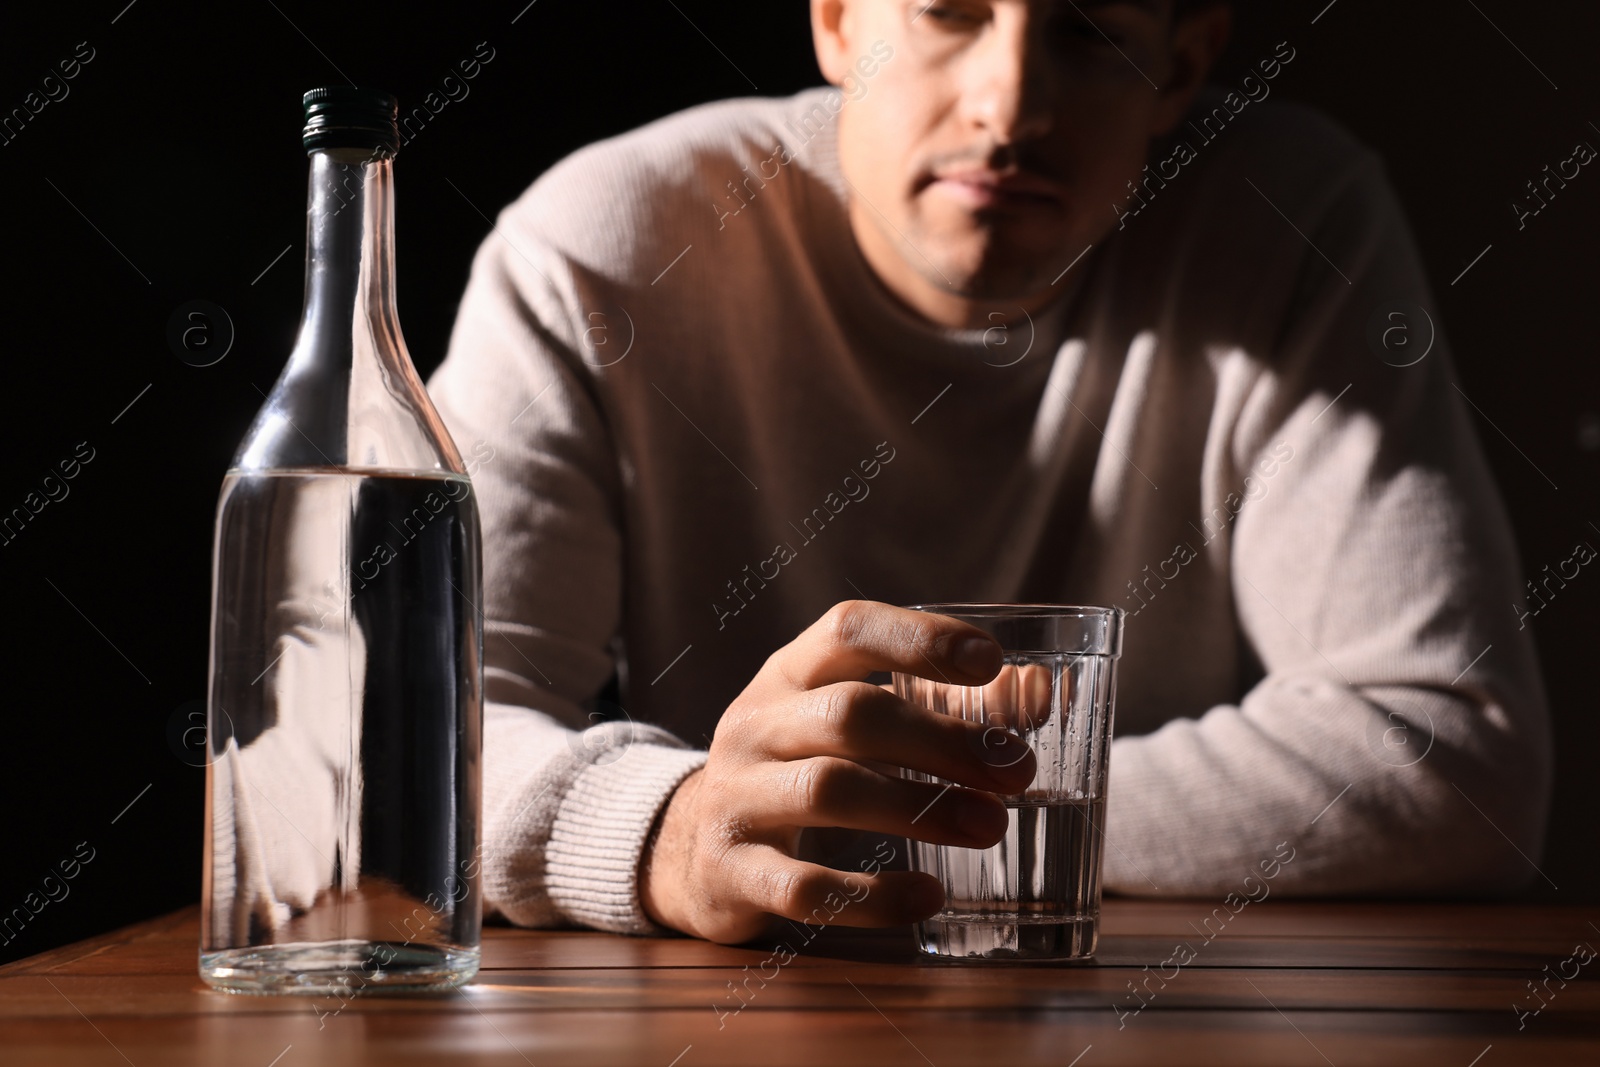 Photo of Addicted man with alcoholic drink at wooden table against black background, closeup